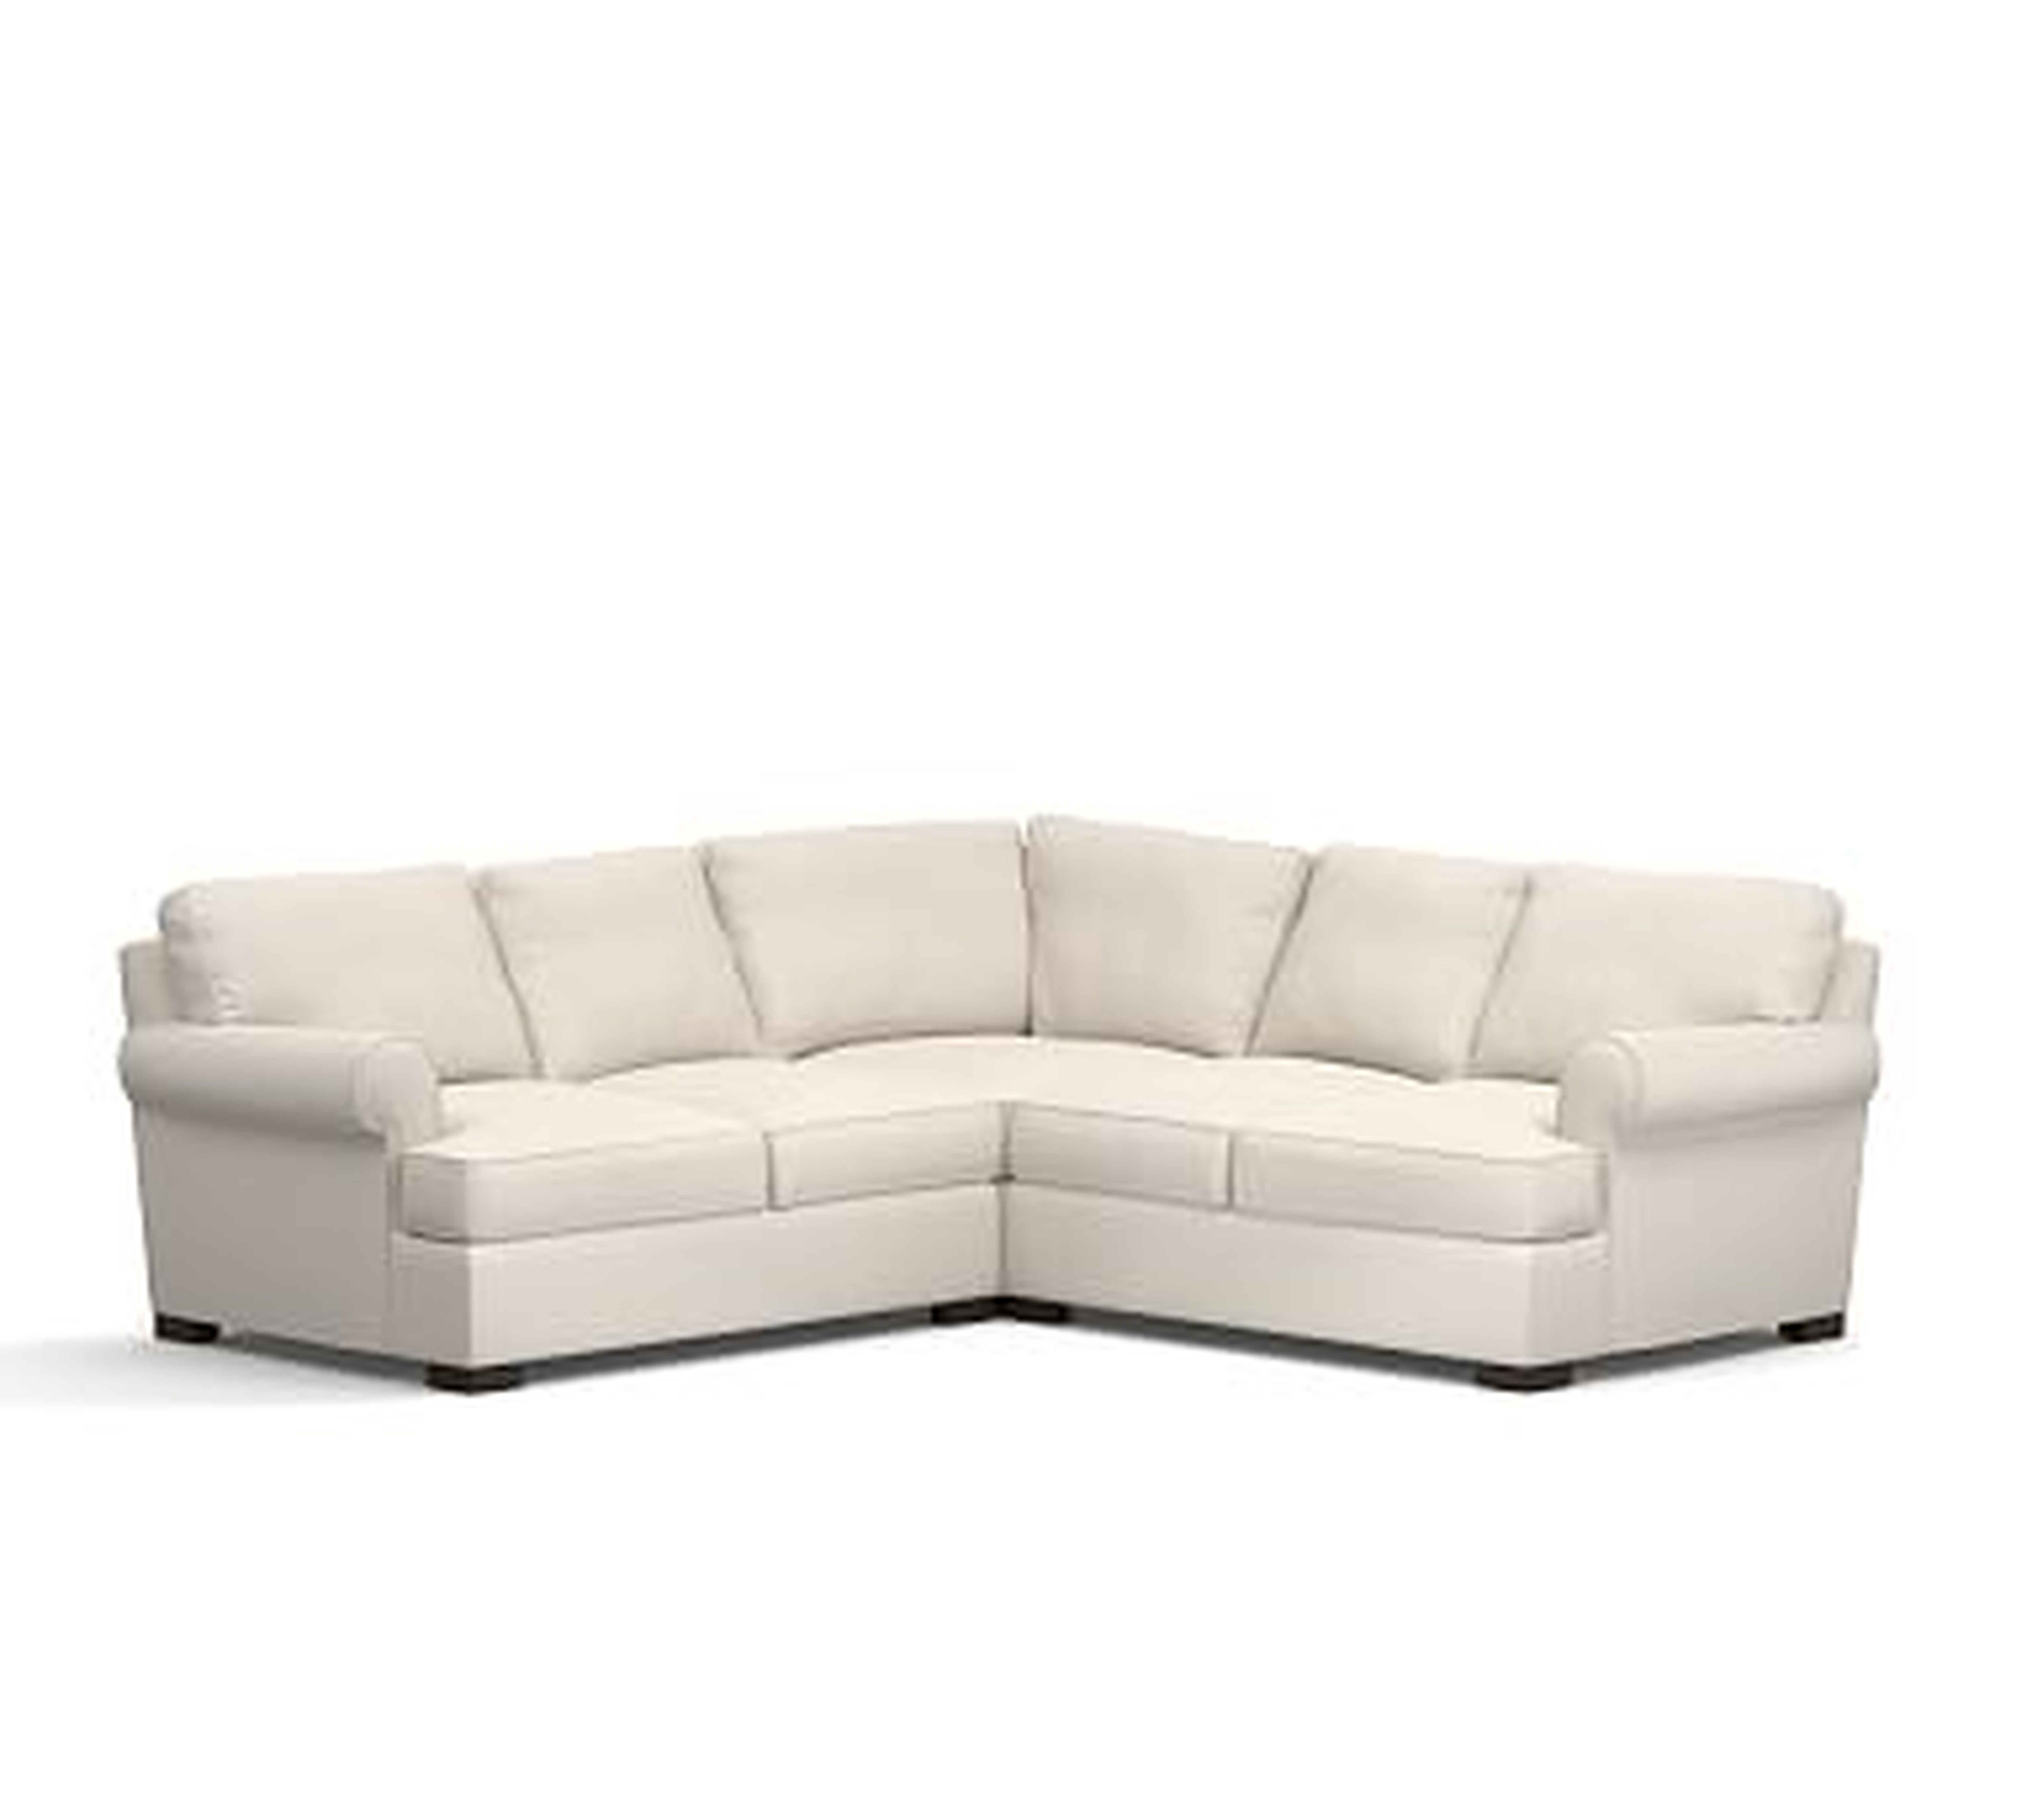 Townsend Roll Arm Upholstered 3-Piece L-Shaped Corner Sectional, Polyester Wrapped Cushions, Performance Tweed Ecru - Pottery Barn